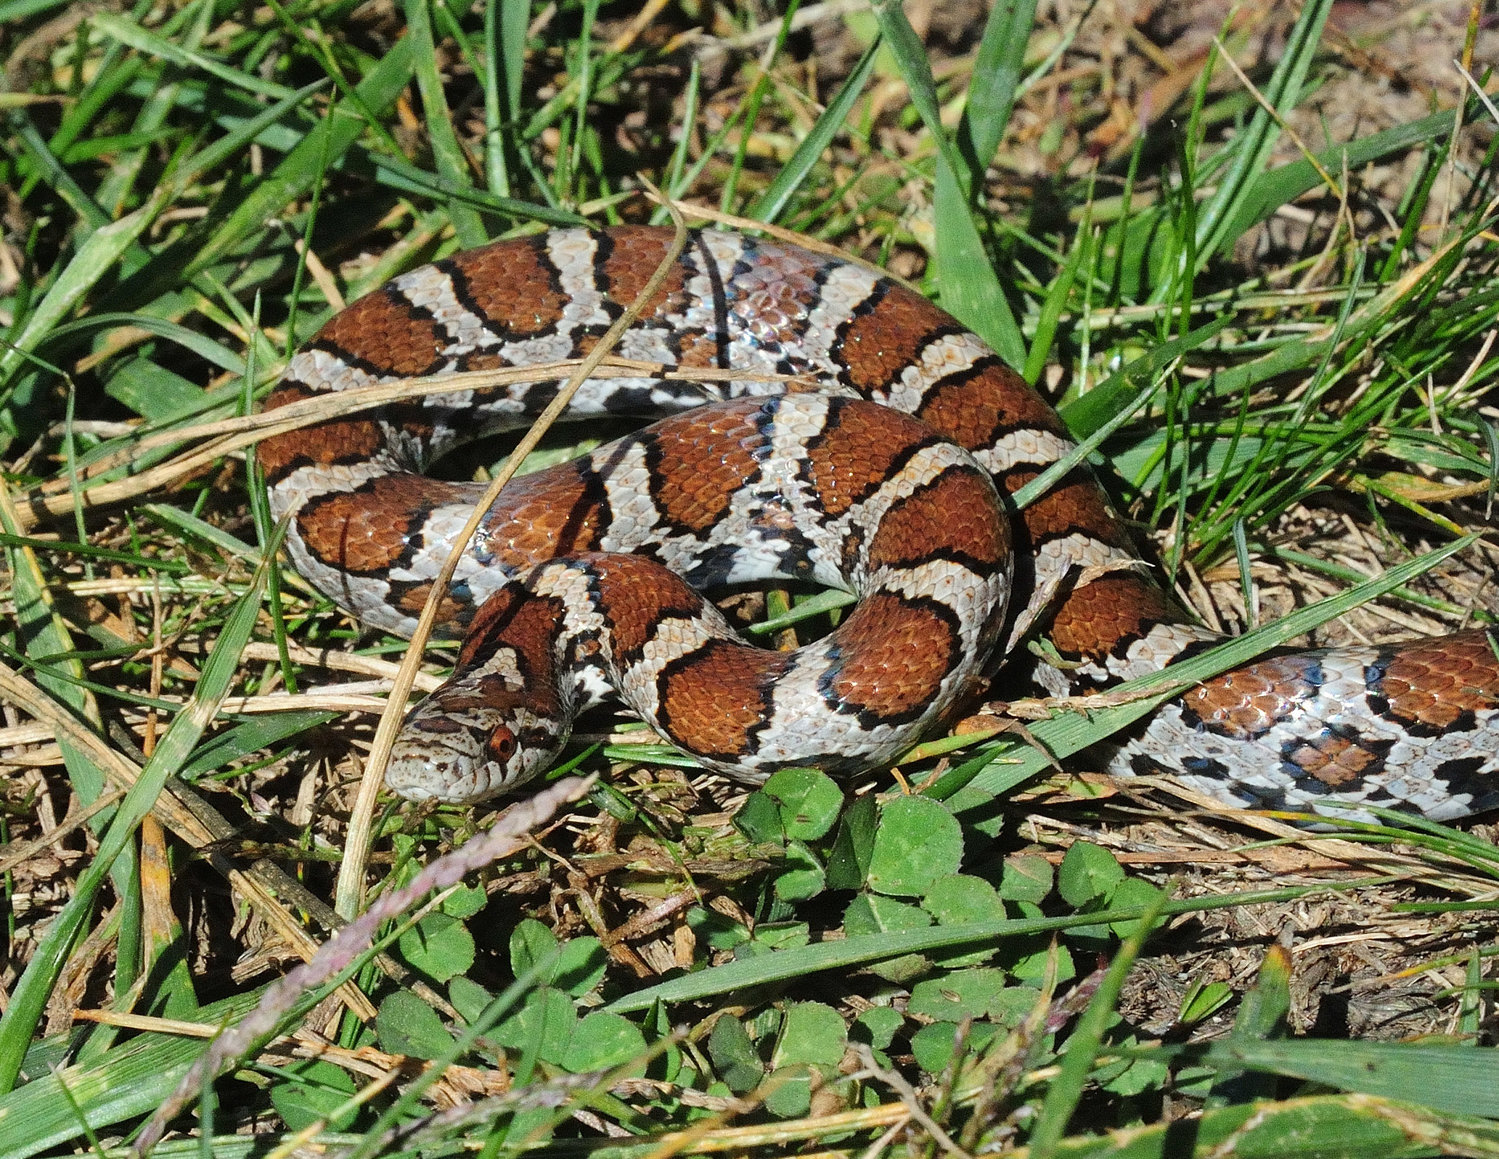 This milksnake is a younger individual with a length of about 20 inches. Larger snakes of this species can reach lengths of over four feet. This one has the characteristic rust-colored dorsal back markings fringed with black on a beige background. Similar lateral marks run along each side of the snake’s body.